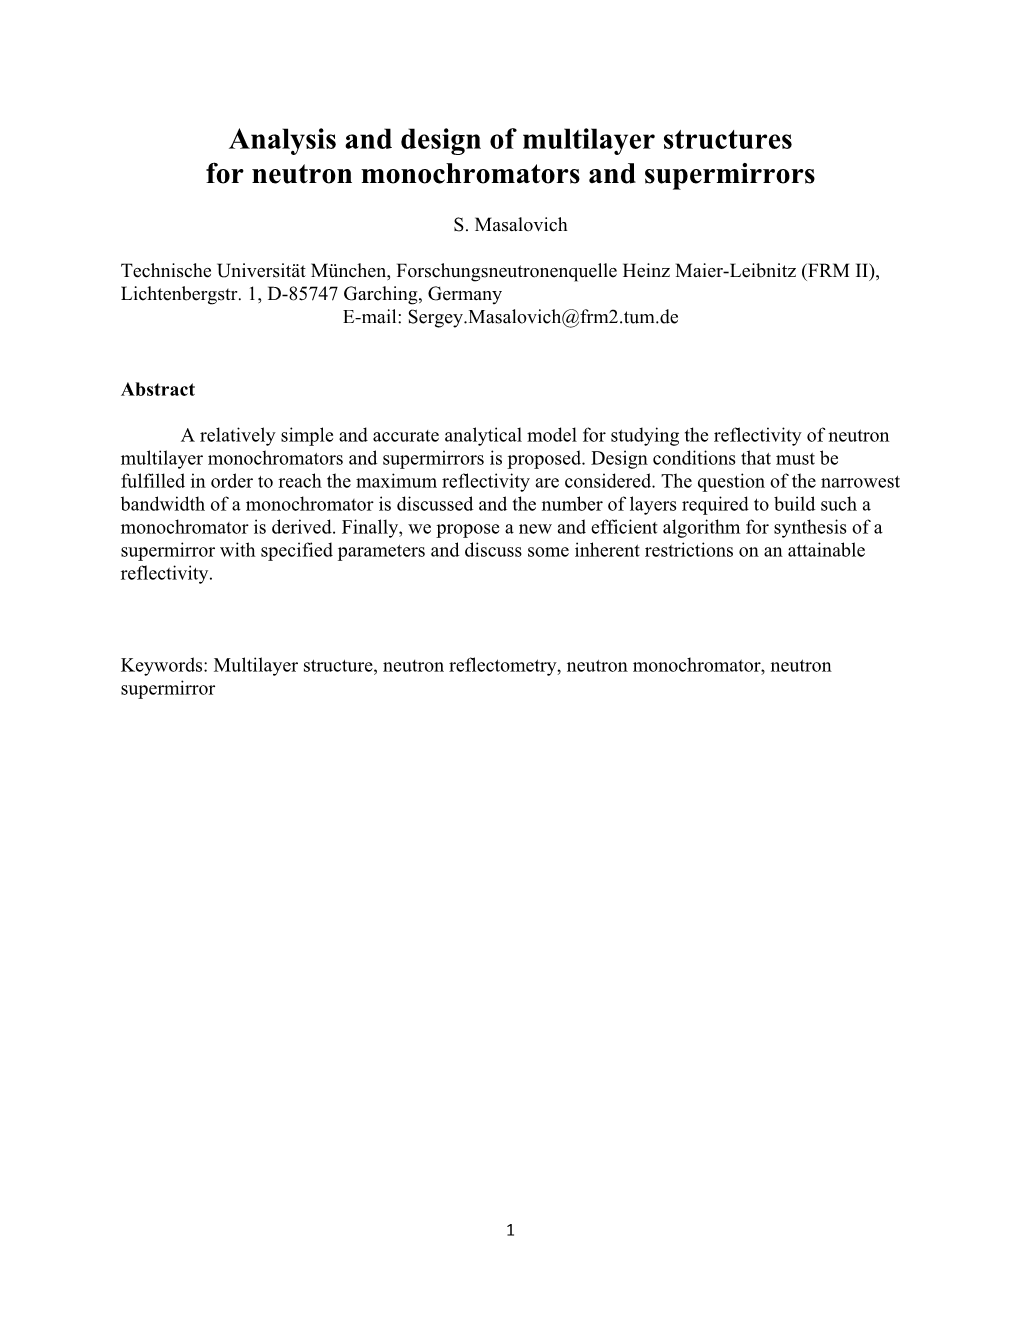 Analysis and Design of Multilayer Structures for Neutron Monochromators and Supermirrors